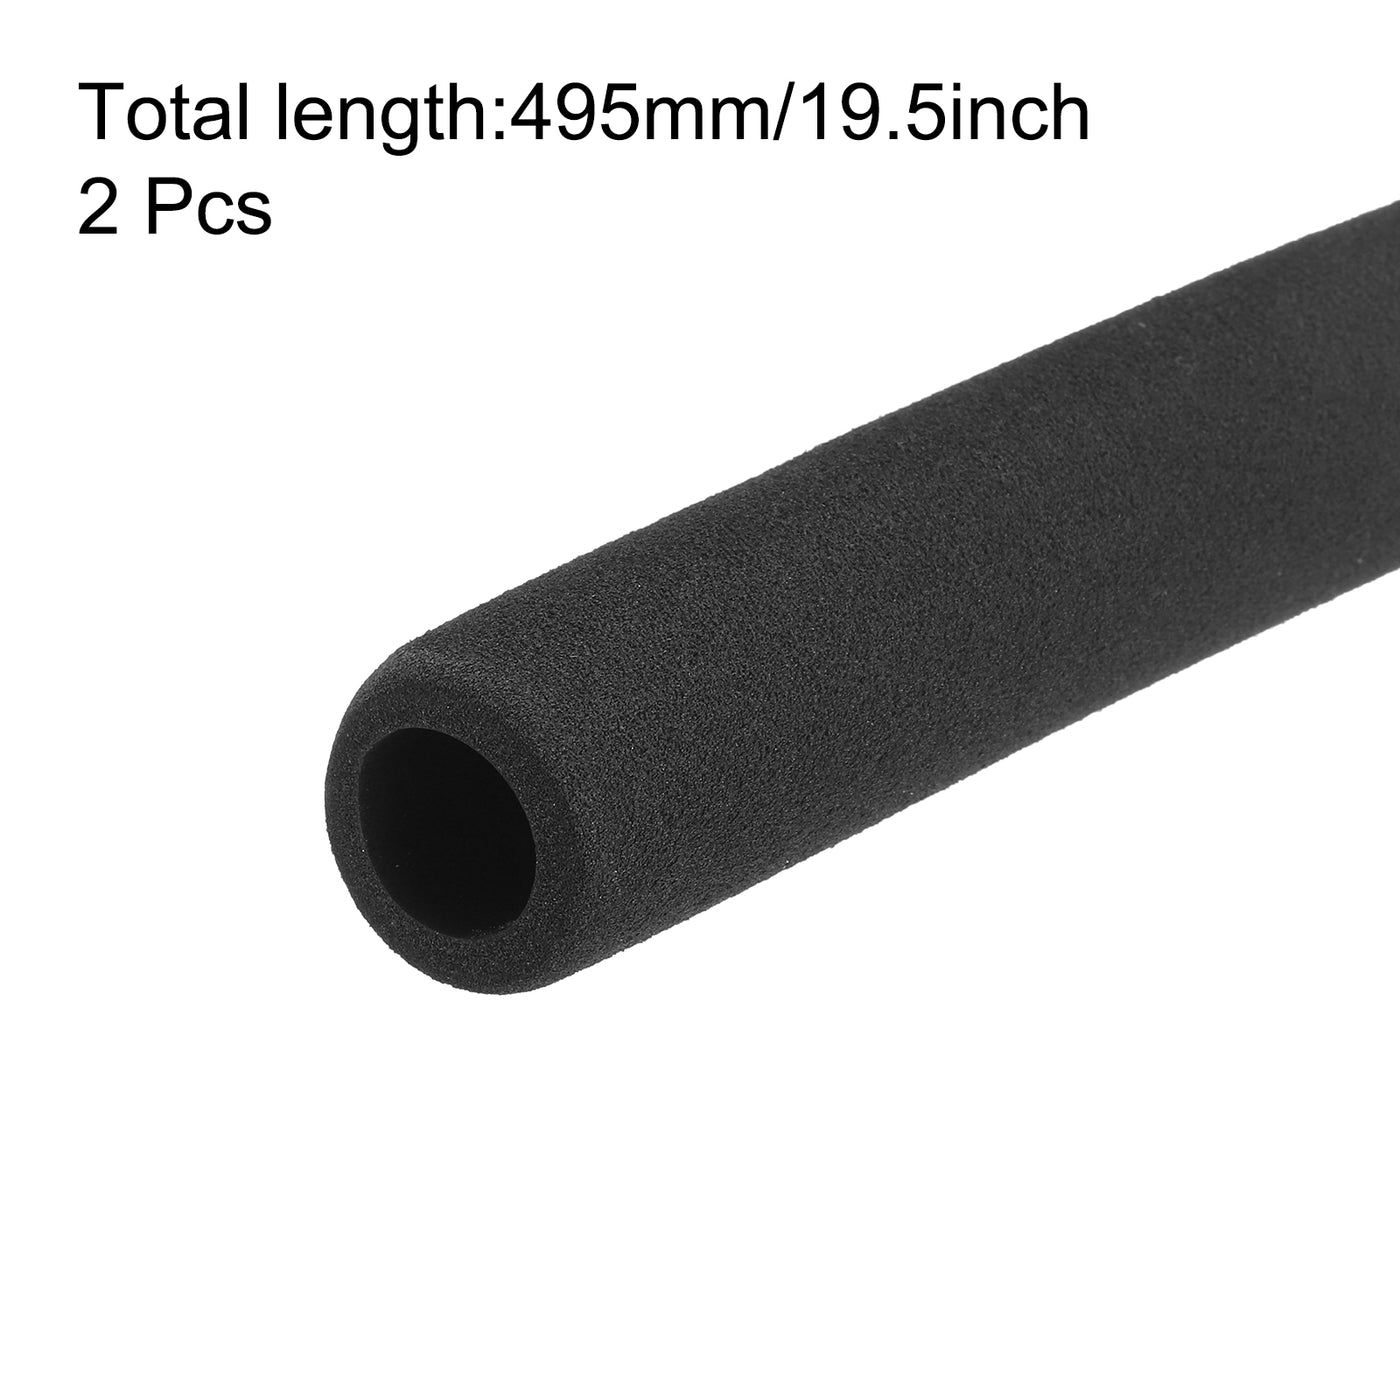 uxcell Uxcell Pipe Insulation Tube Foam Tubing for Handle Grip Support 18mm ID 30mm OD 495mm Heat Preservation Black 2pcs